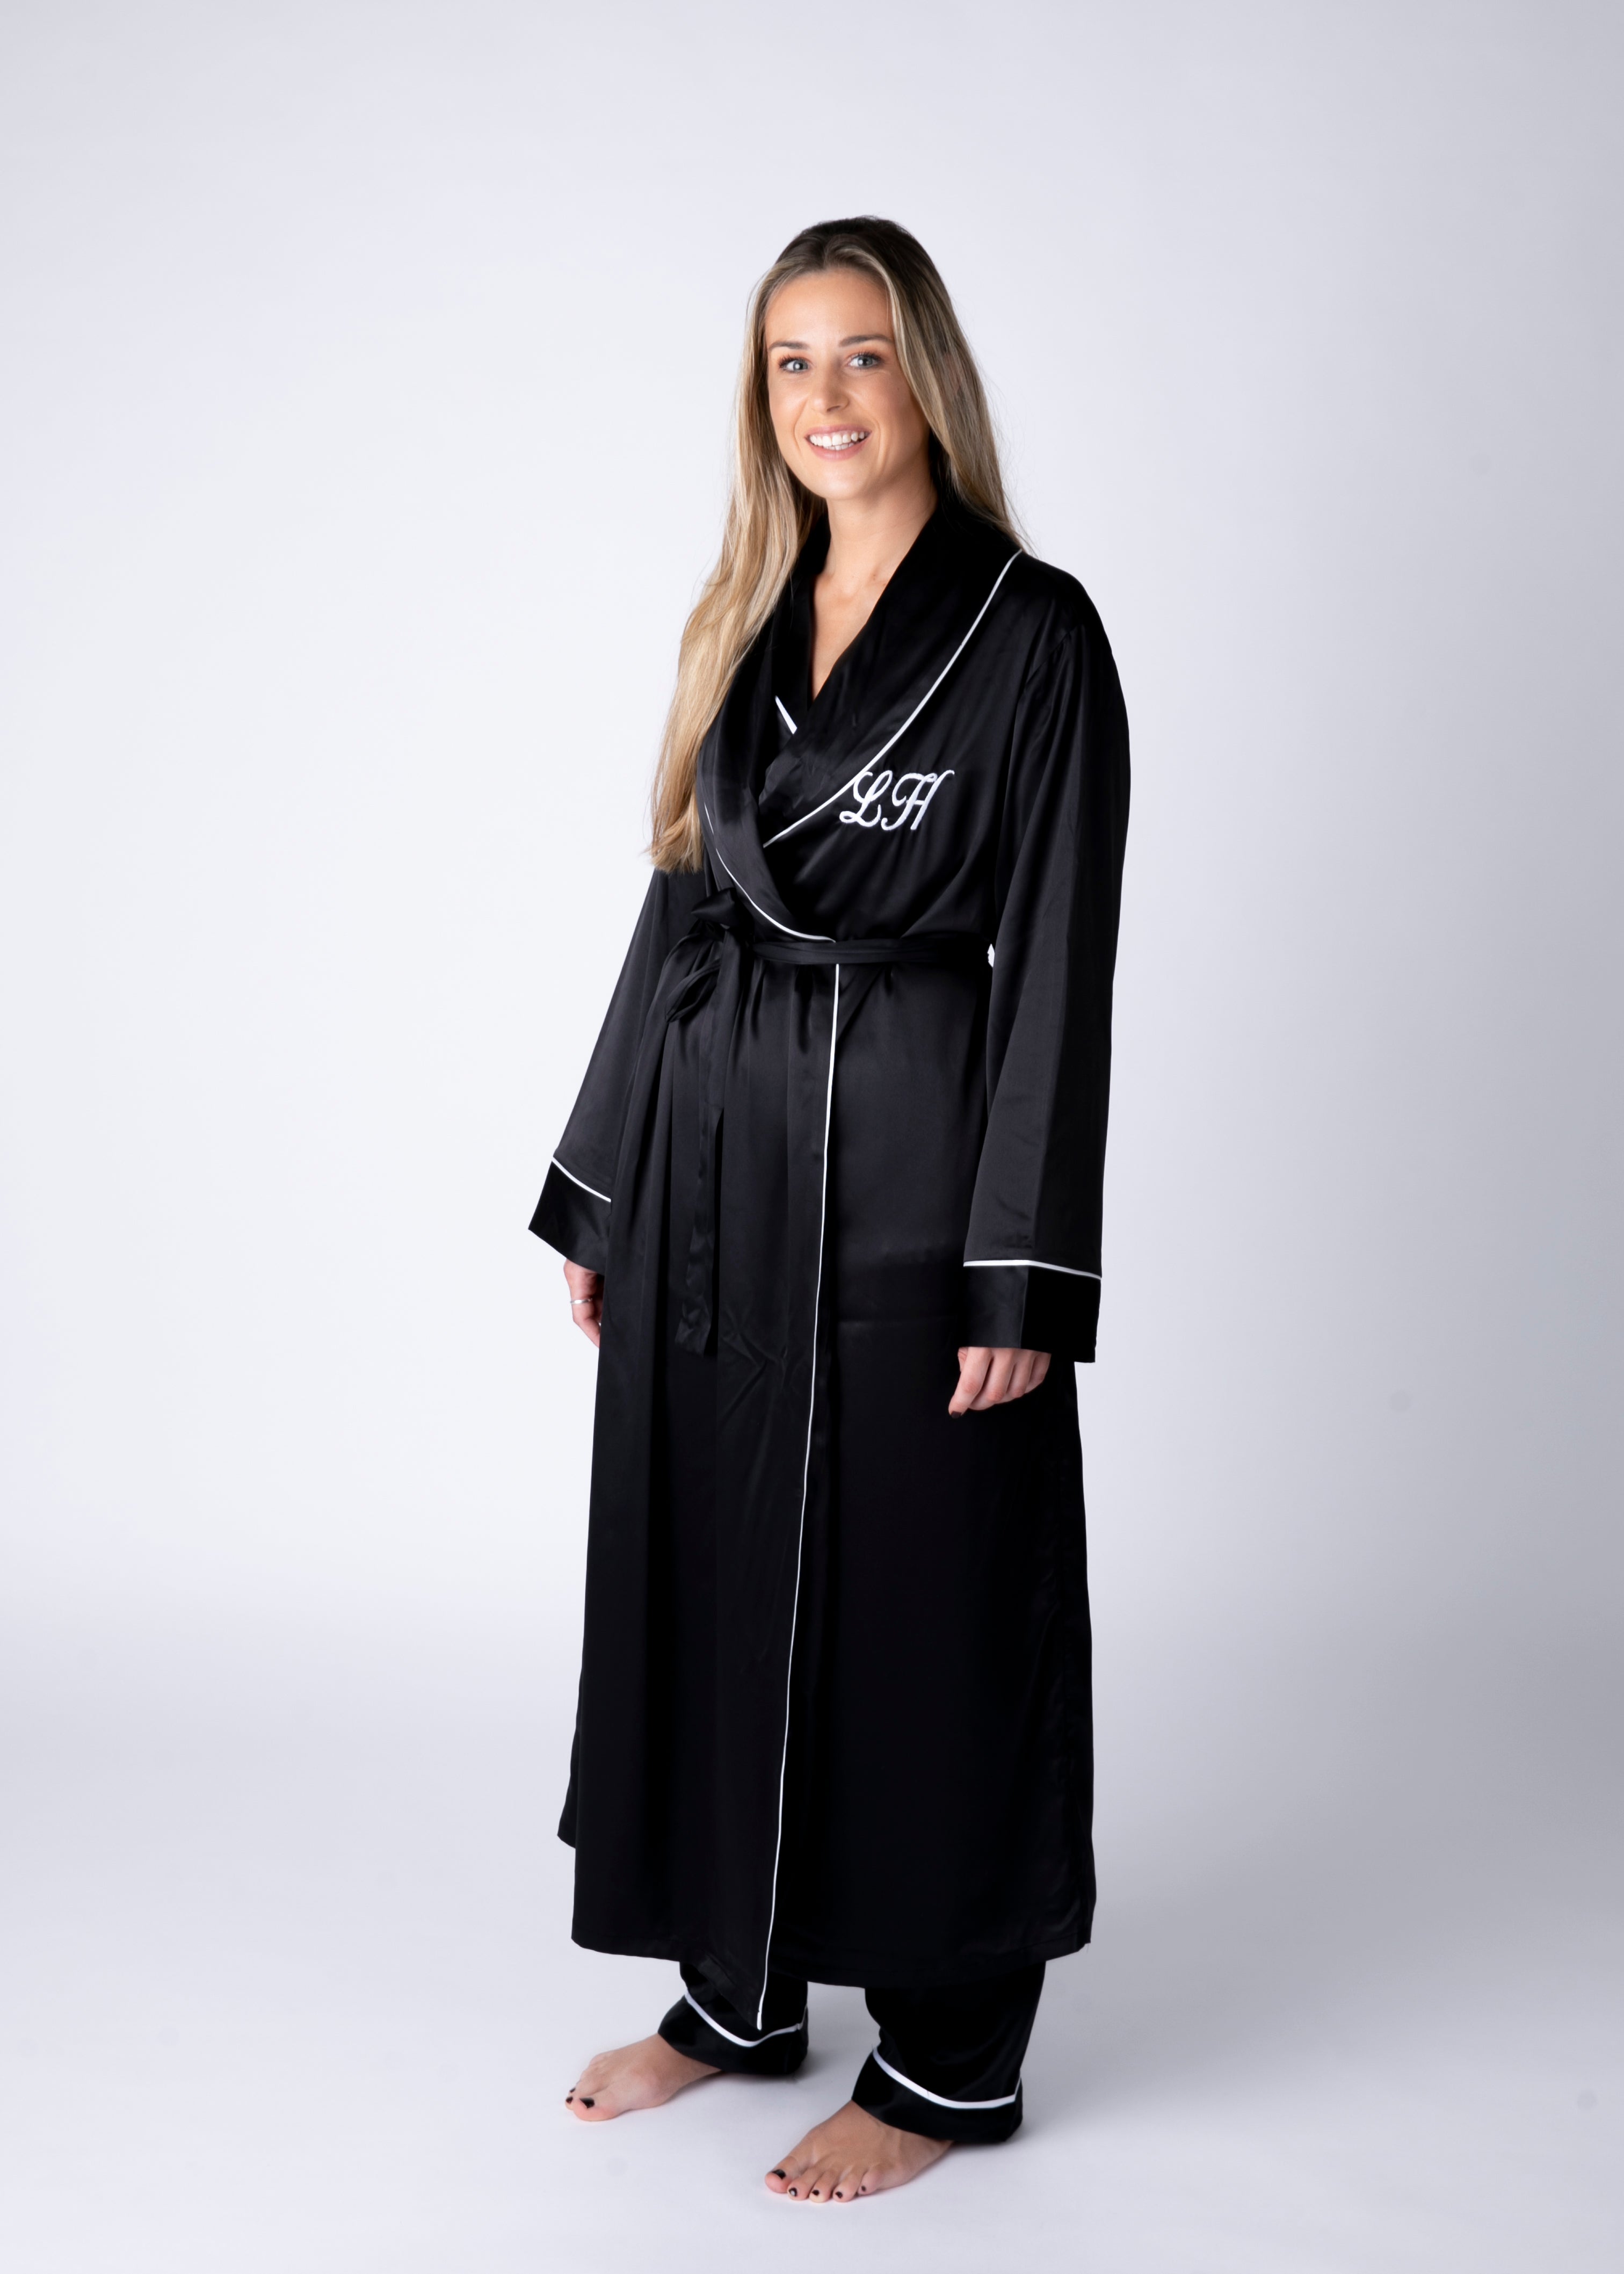 Hamper-Long Black Silky robe with matching Pyjamas with white Piping presented in a gift box with bow